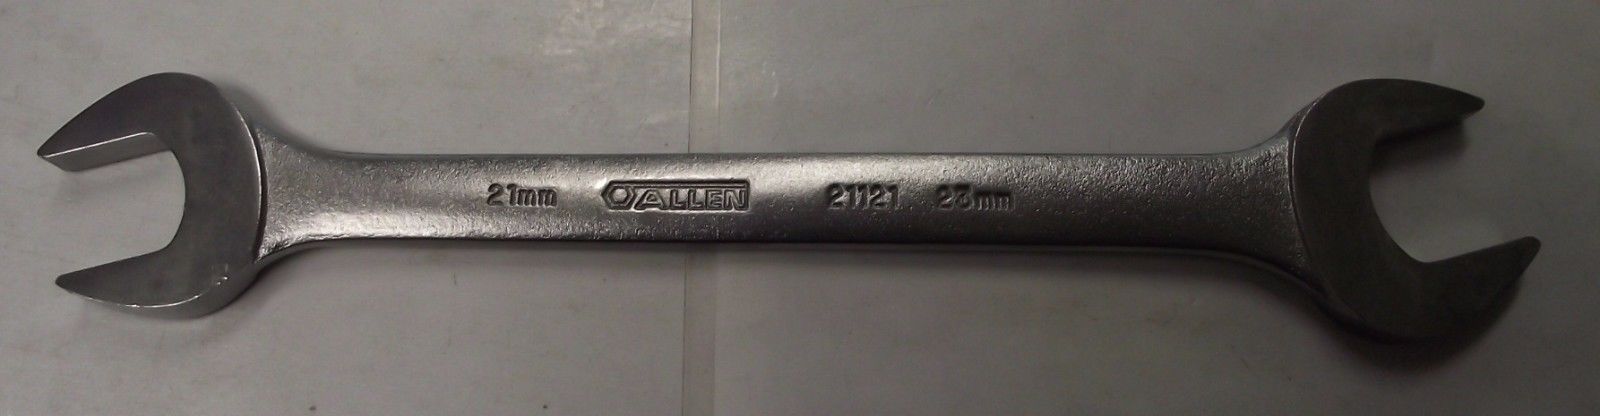 Allen 21121 21mm to 23mm Open End Wrench USA